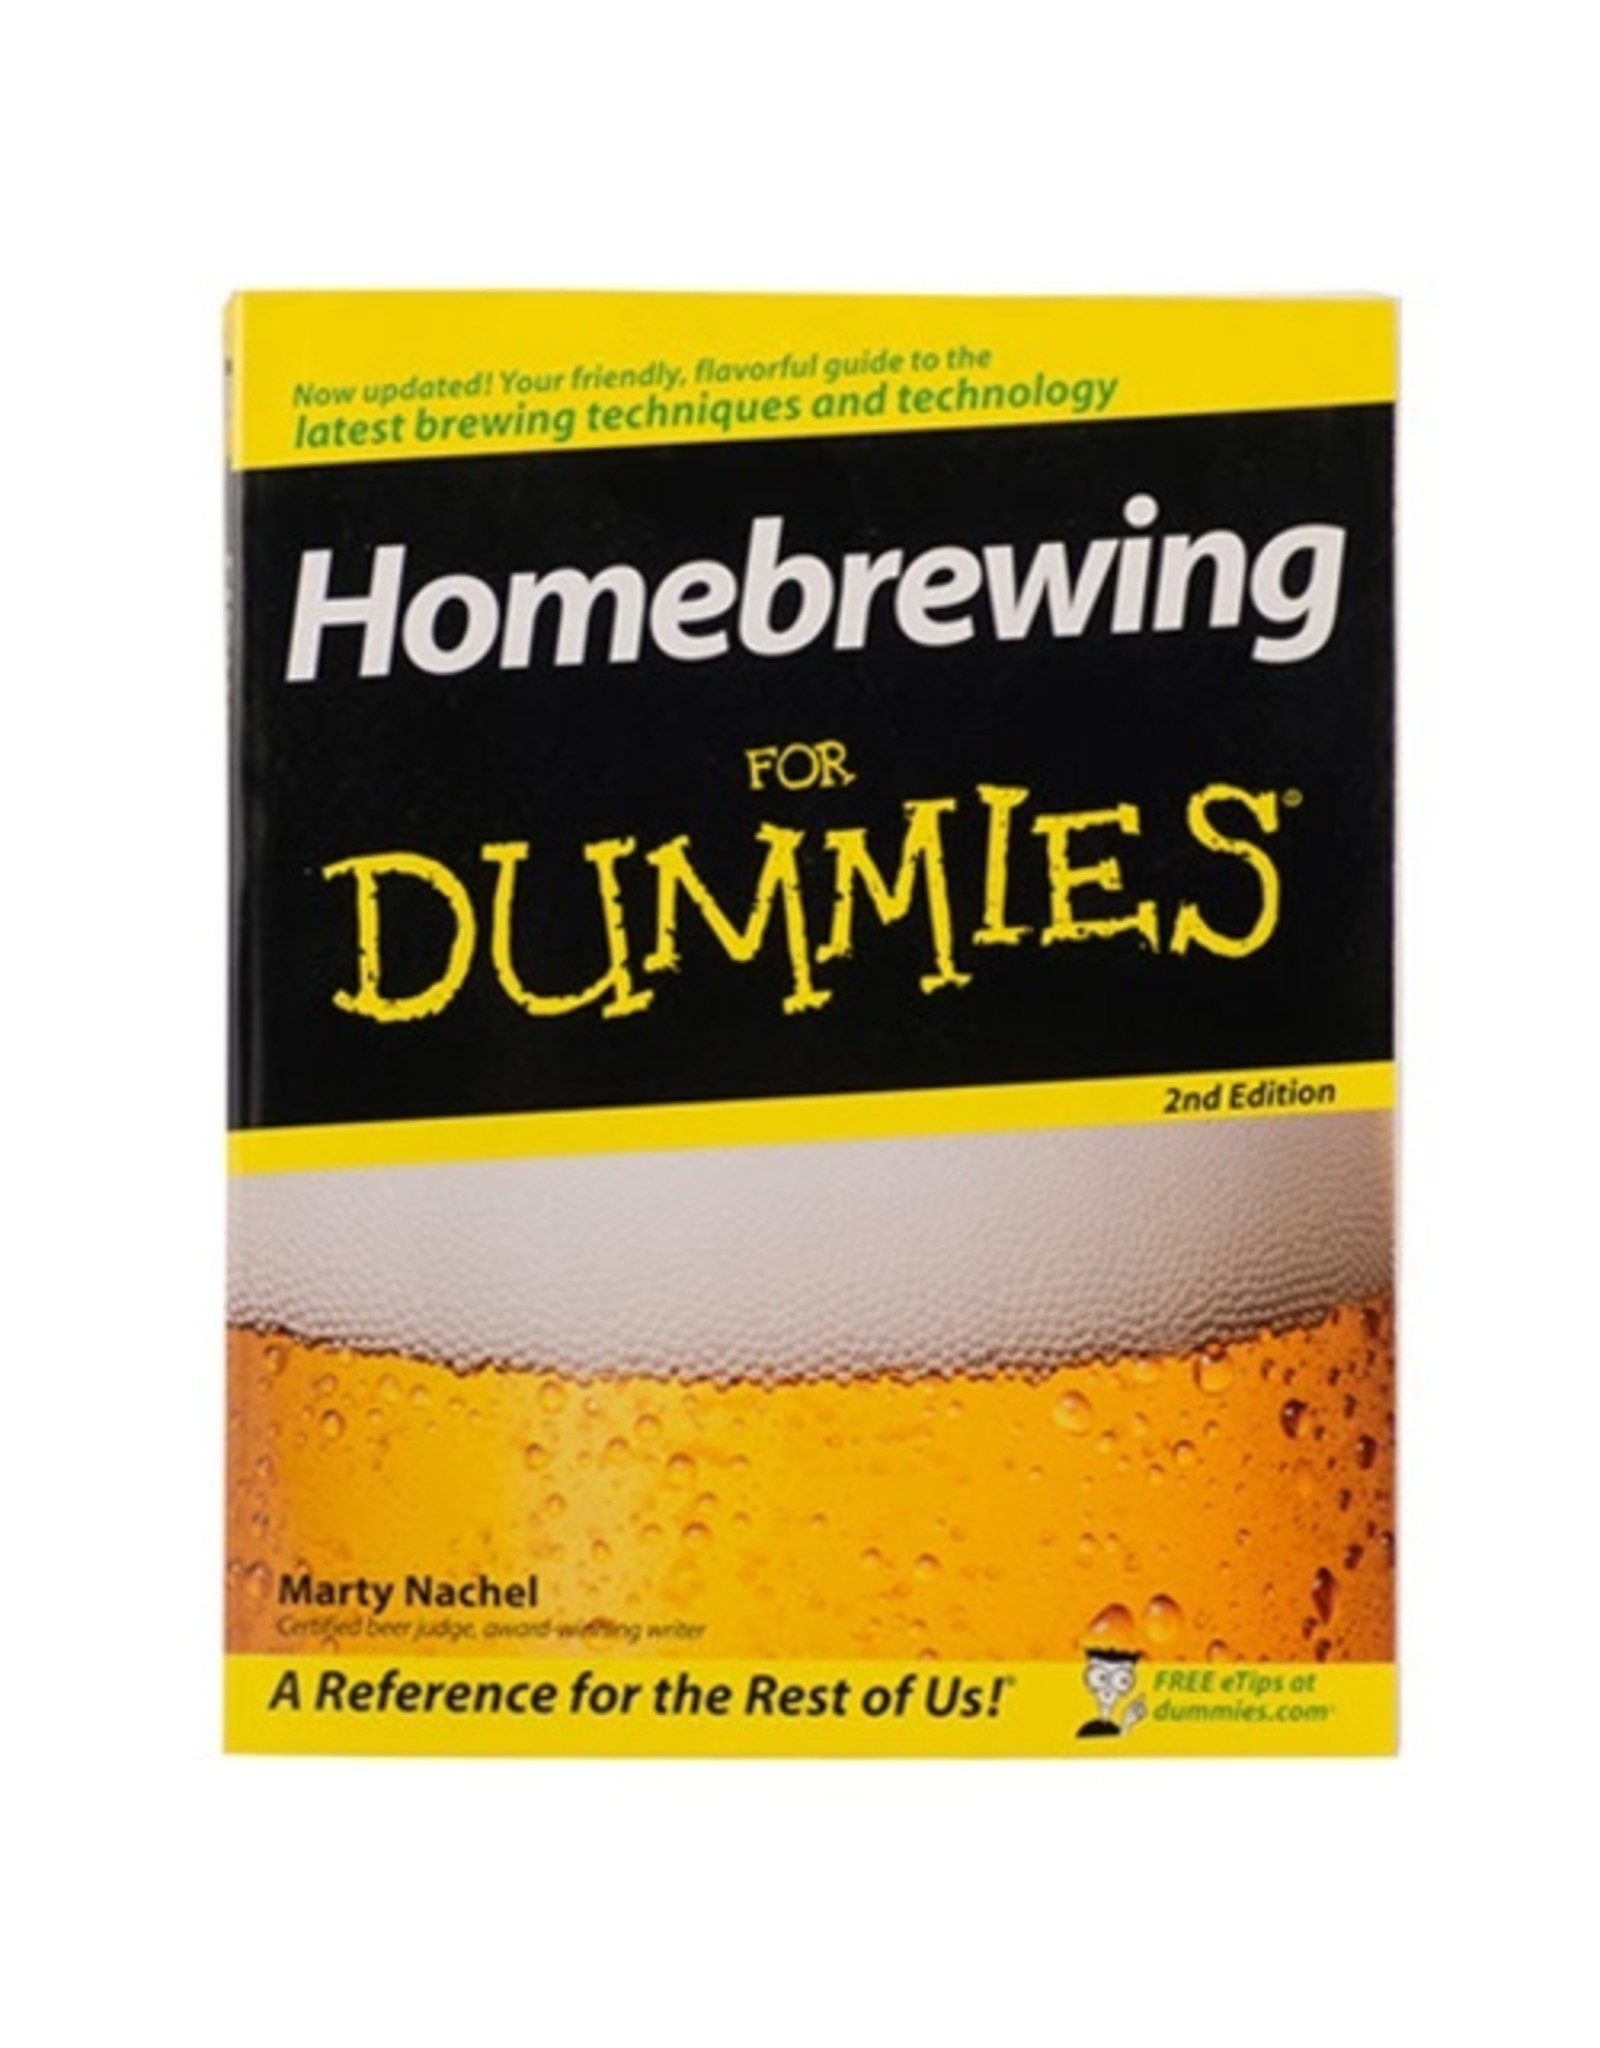 Homebrewing for Dummies  (book)